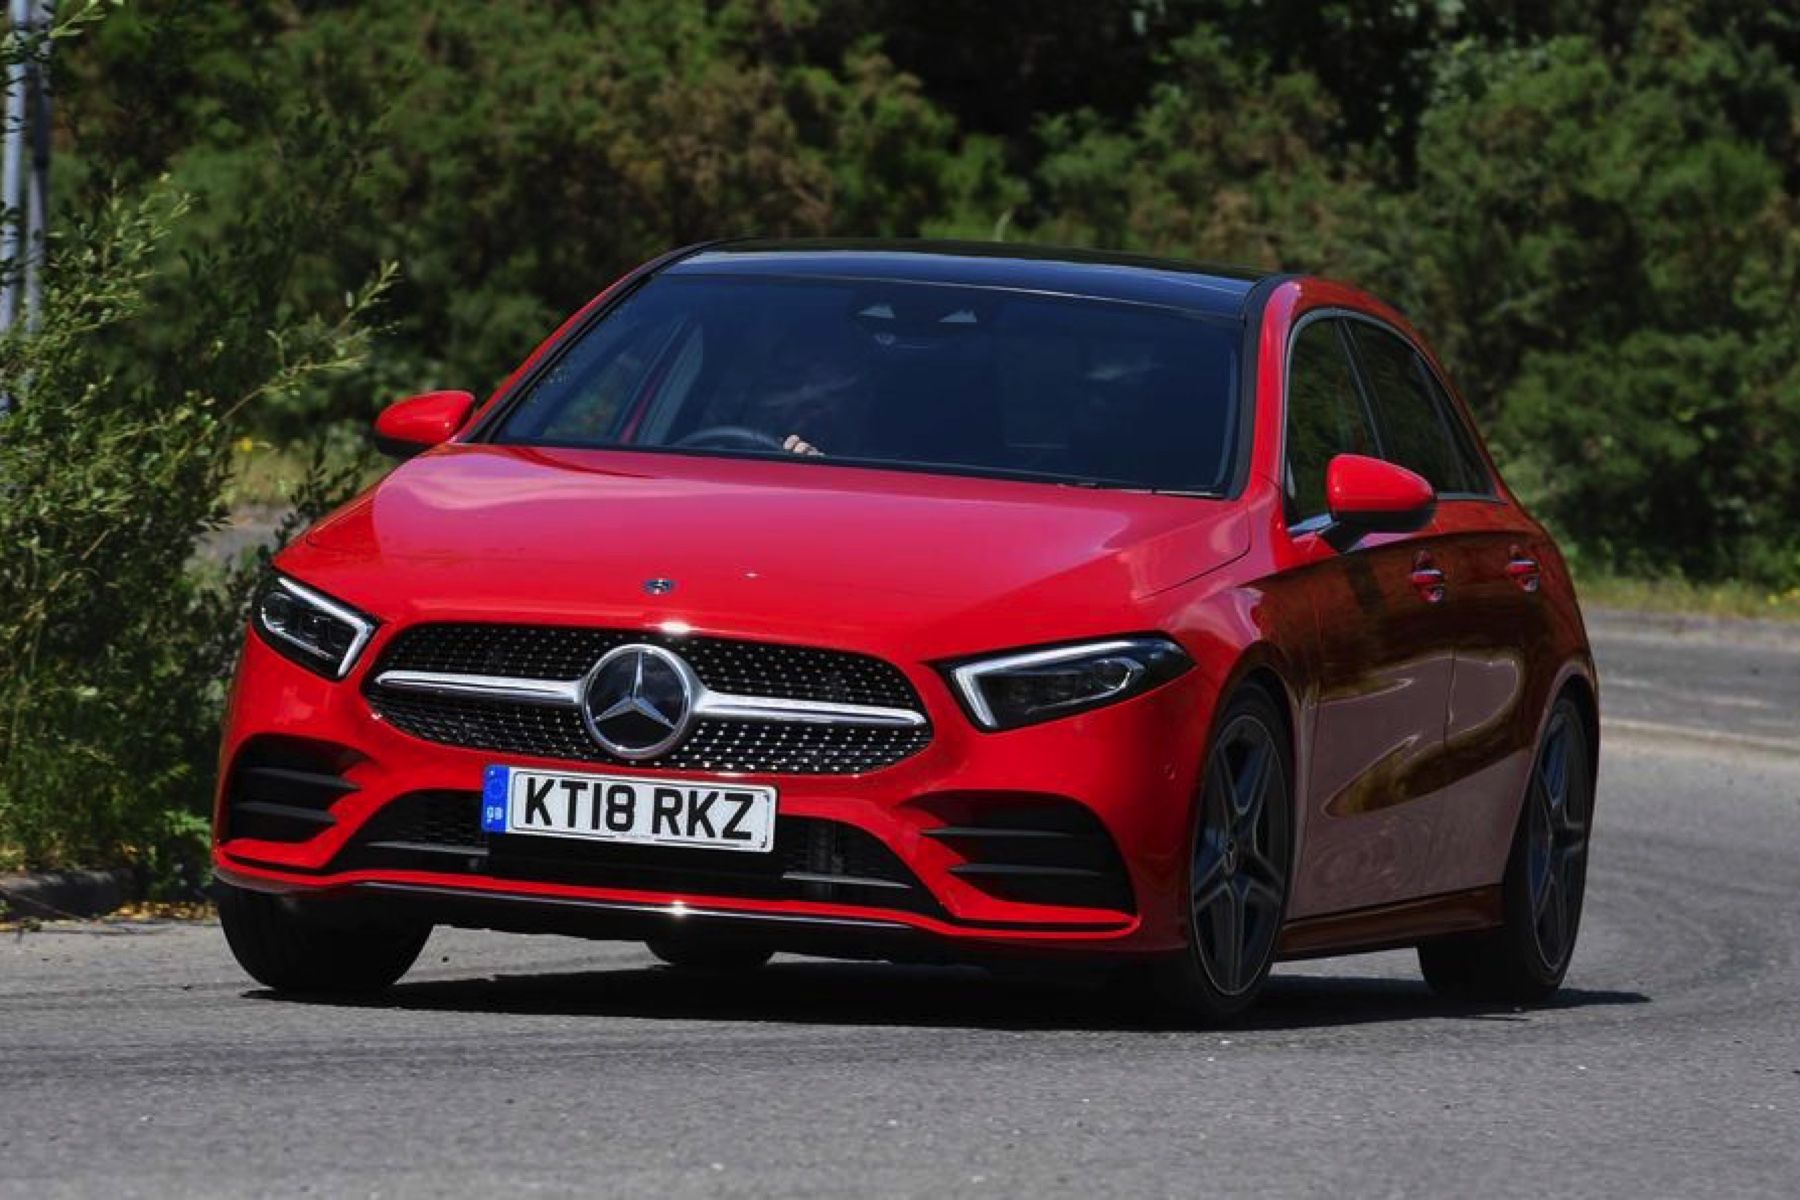 Review: Mercedes-Benz A250e PHEV is pure A-class